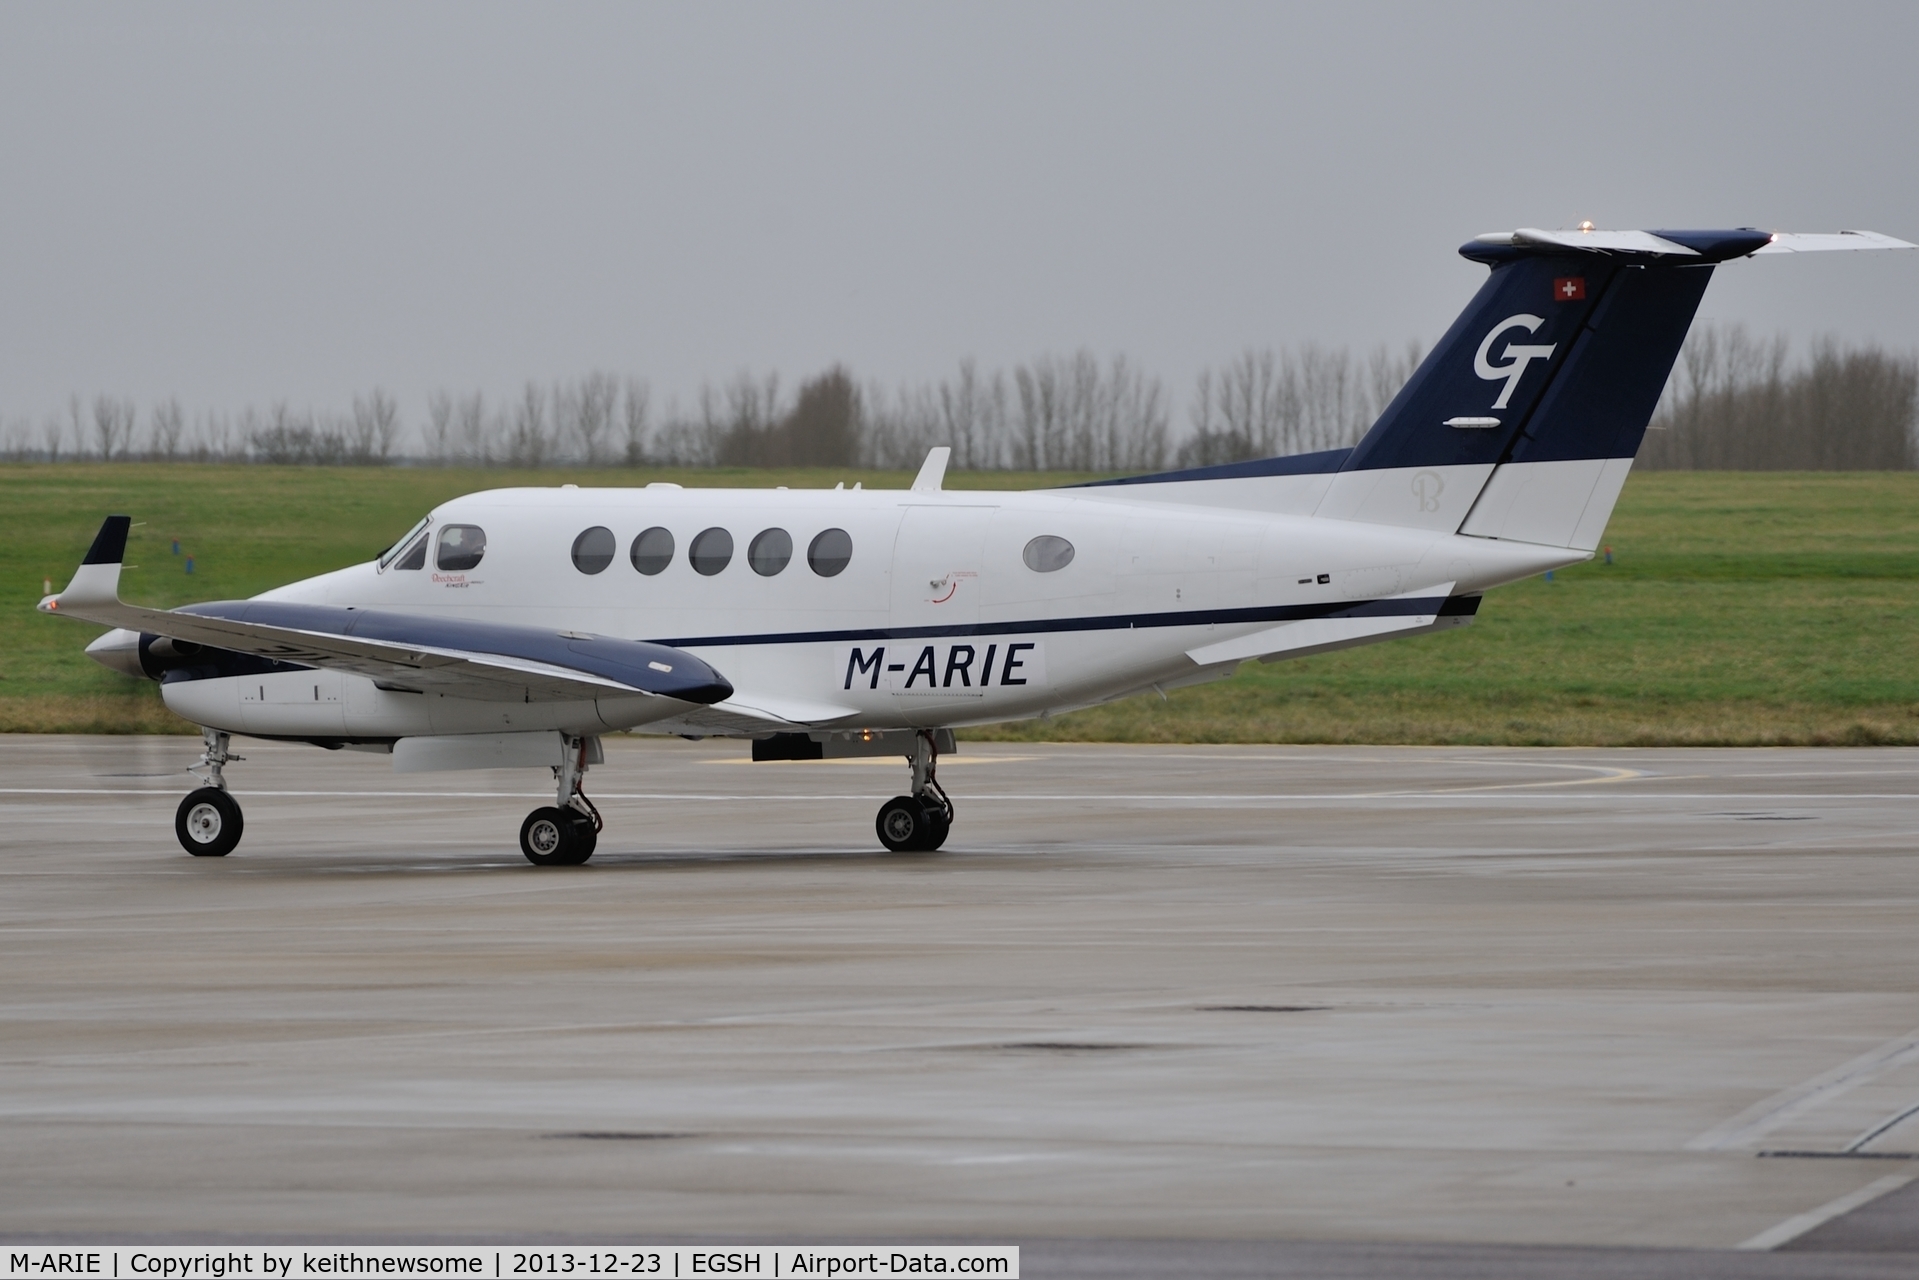 M-ARIE, 2009 Hawker Beechcraft B200GT King Air C/N BY-93, Registration is now used on this King Air 200 !